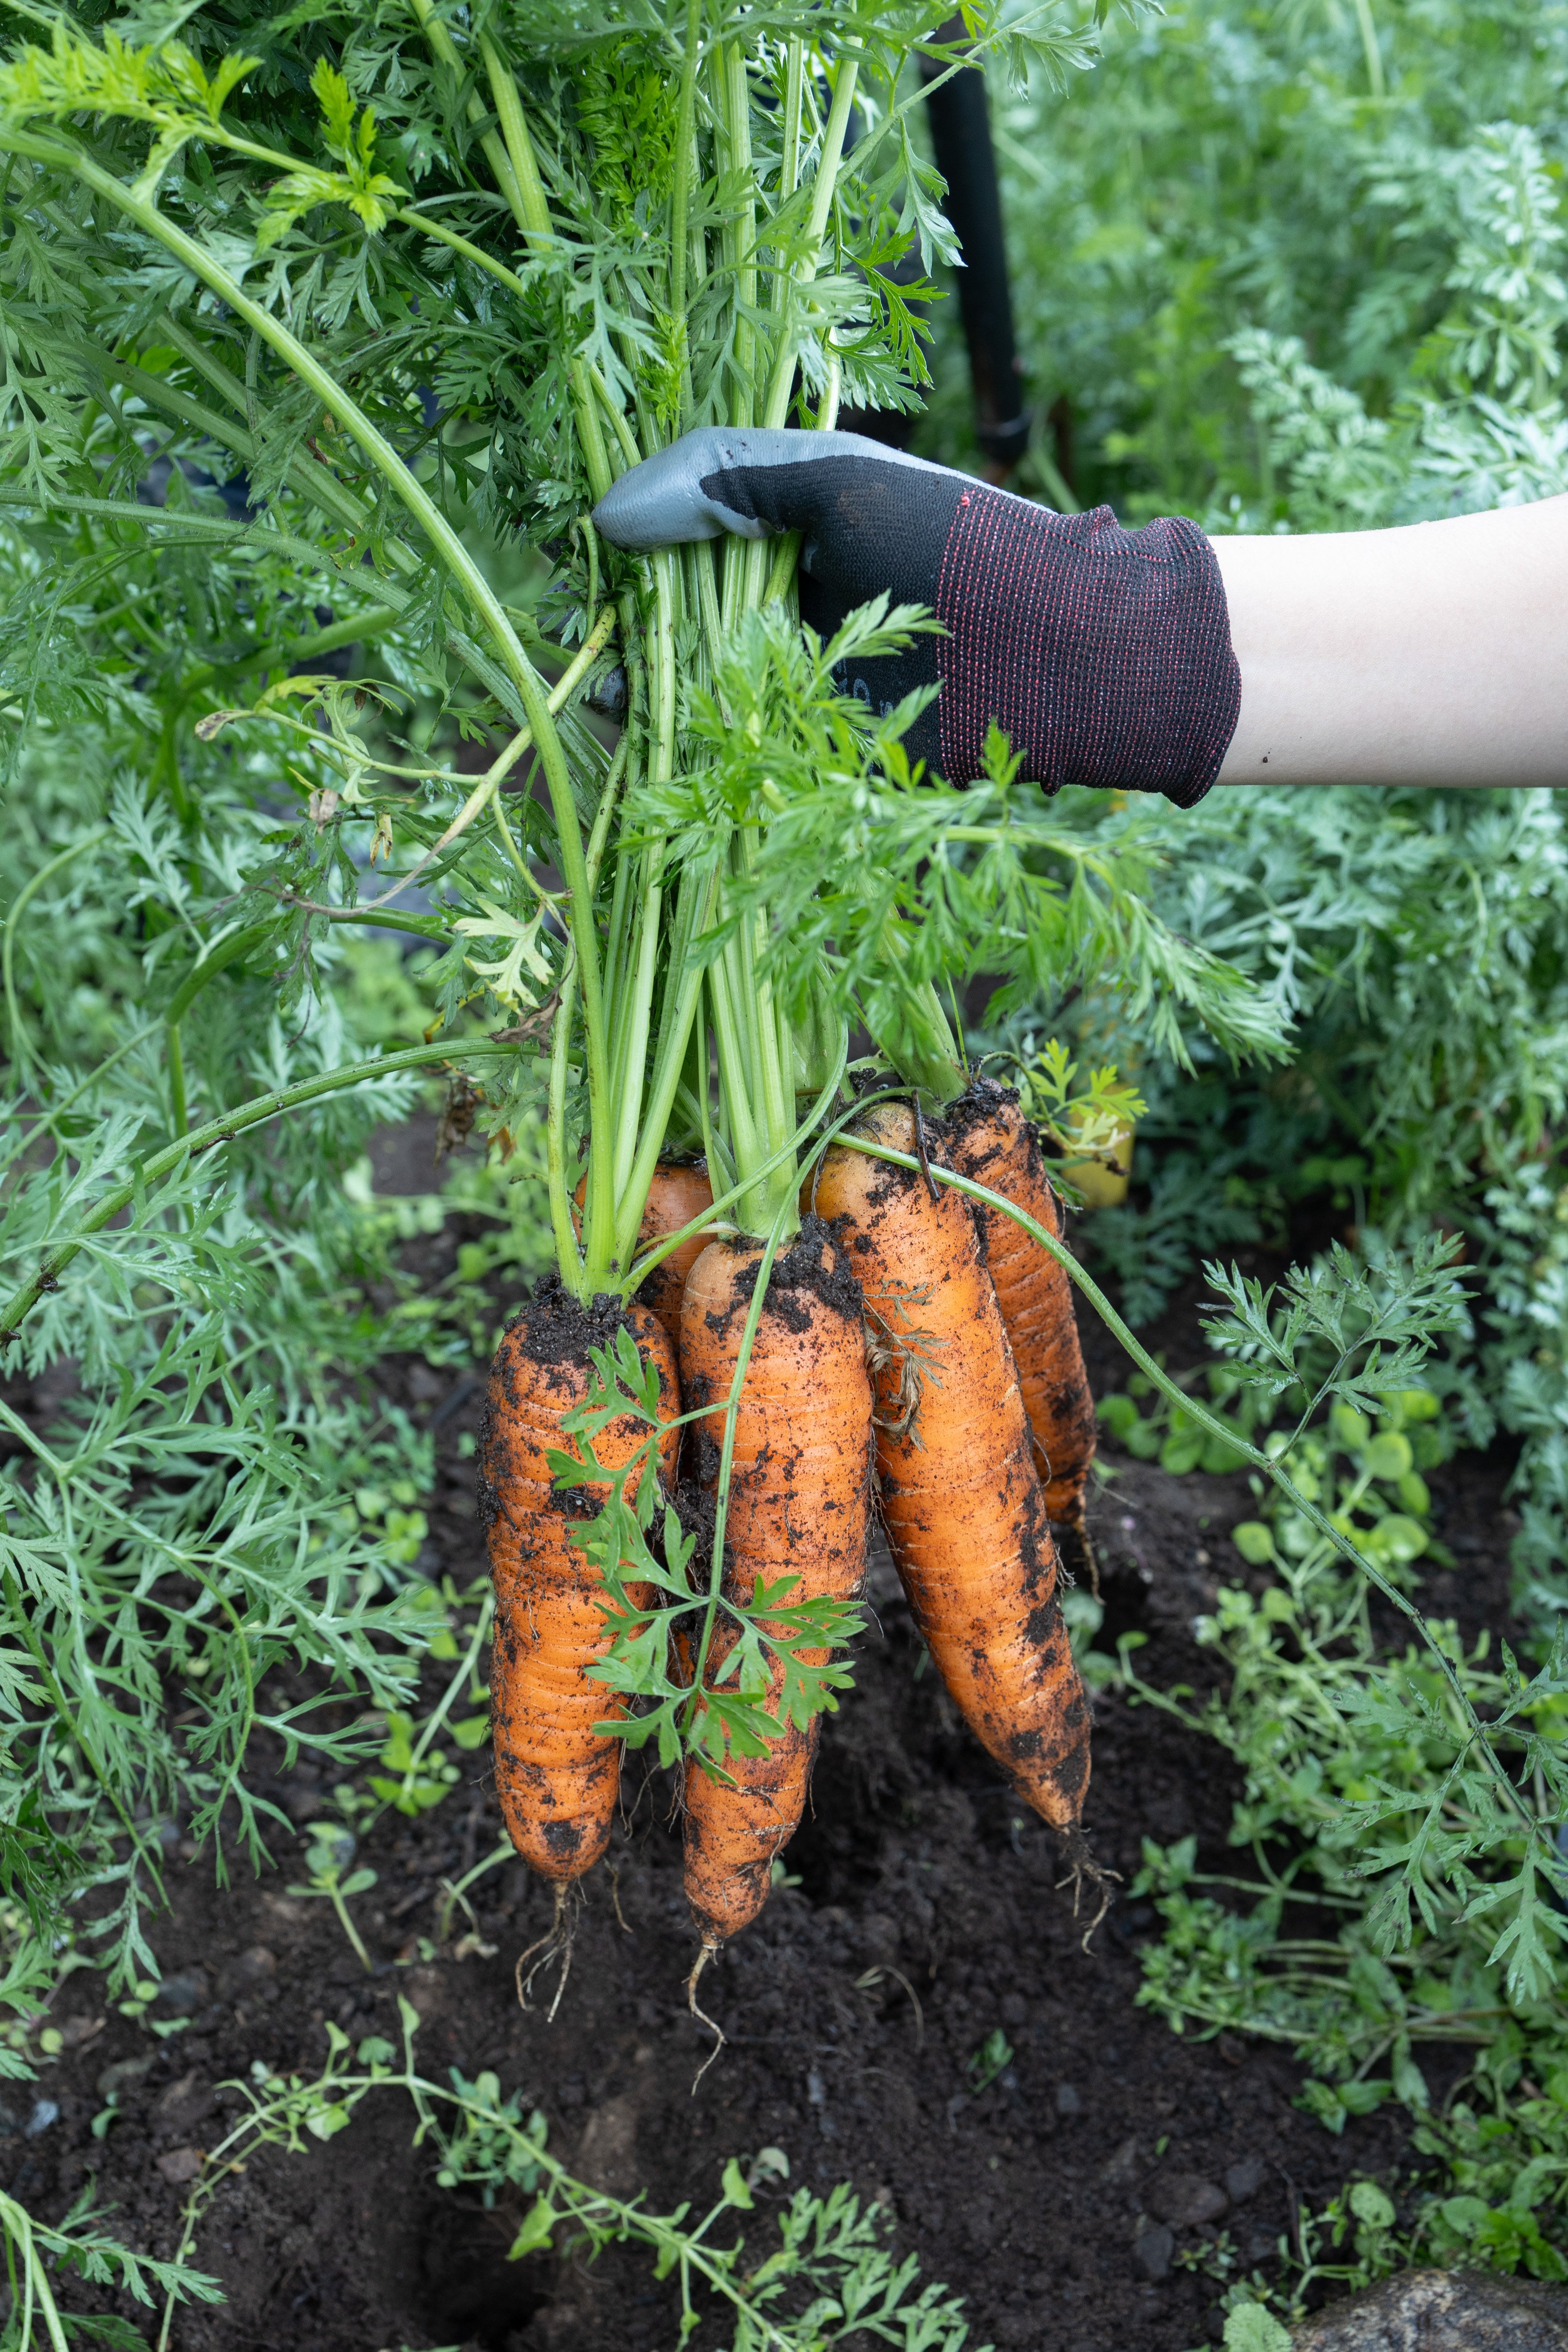 While their classic CANOVI carrot line is classic orange, they also breed other lines, including purple carrots..